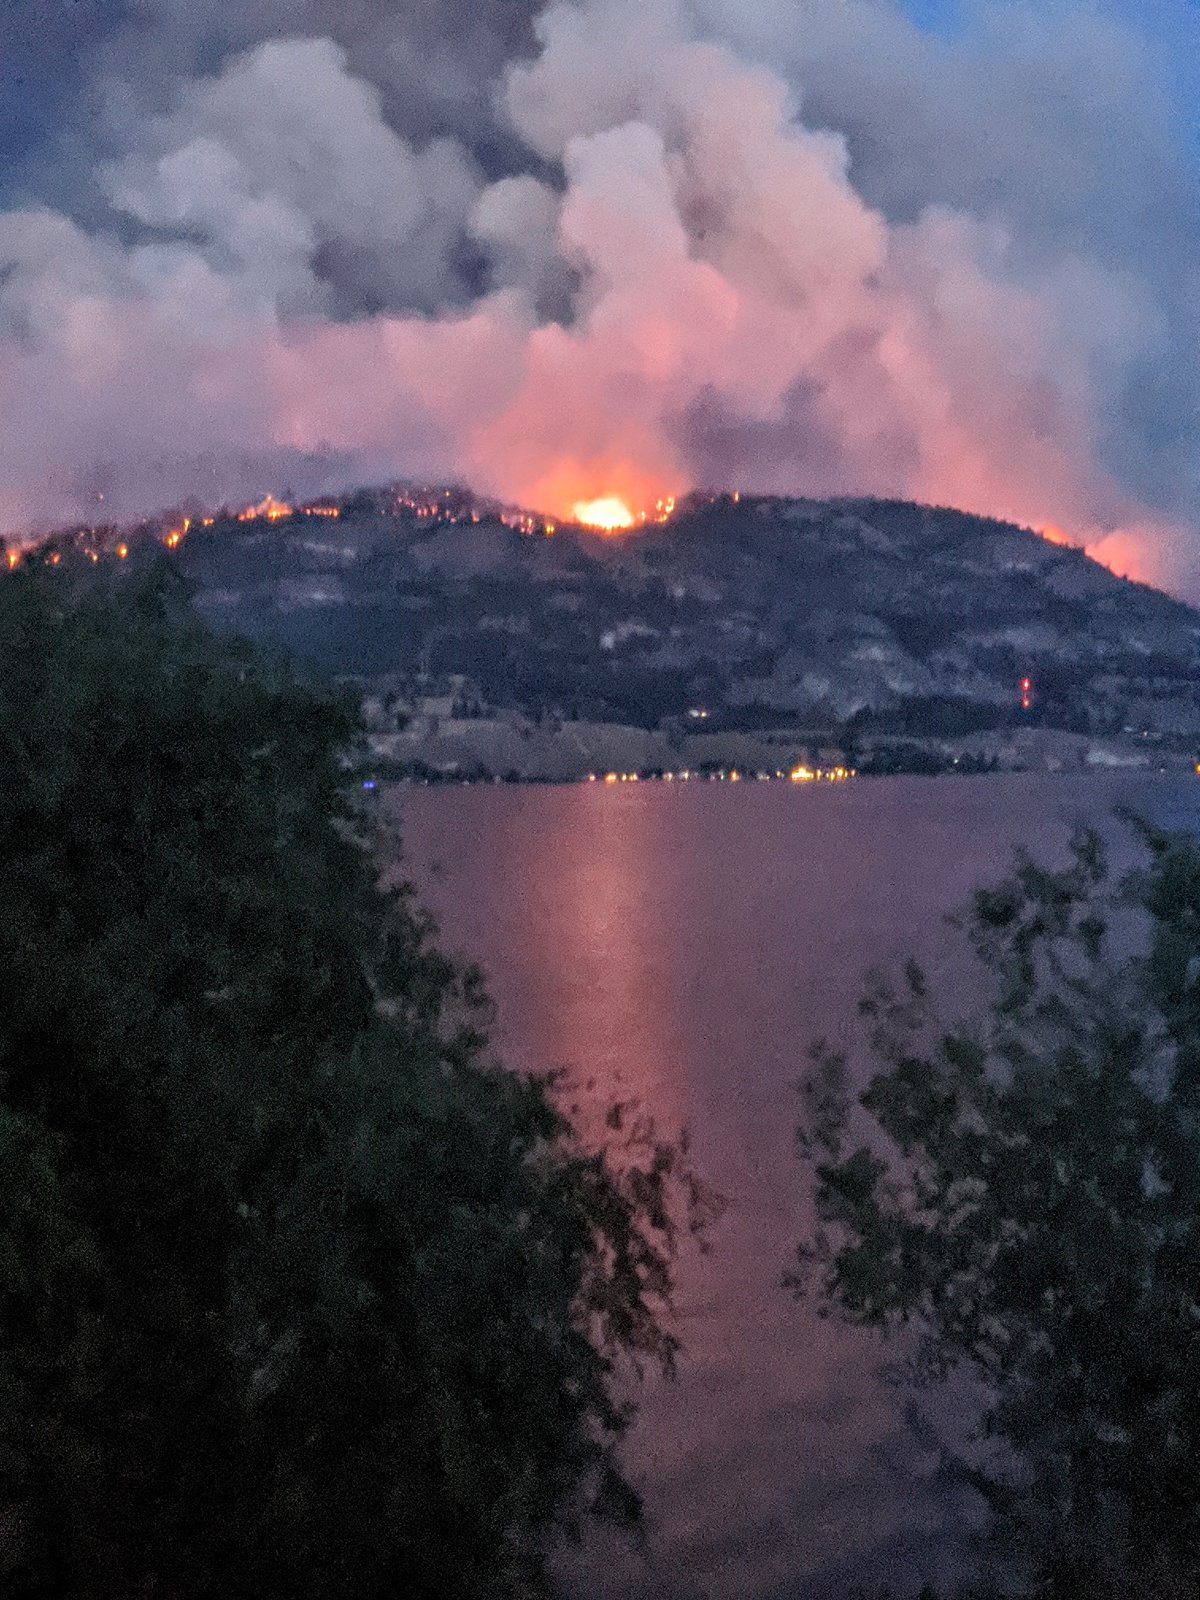 Photos and videos show scale of Christie Mountain wildfire in B.C.’s